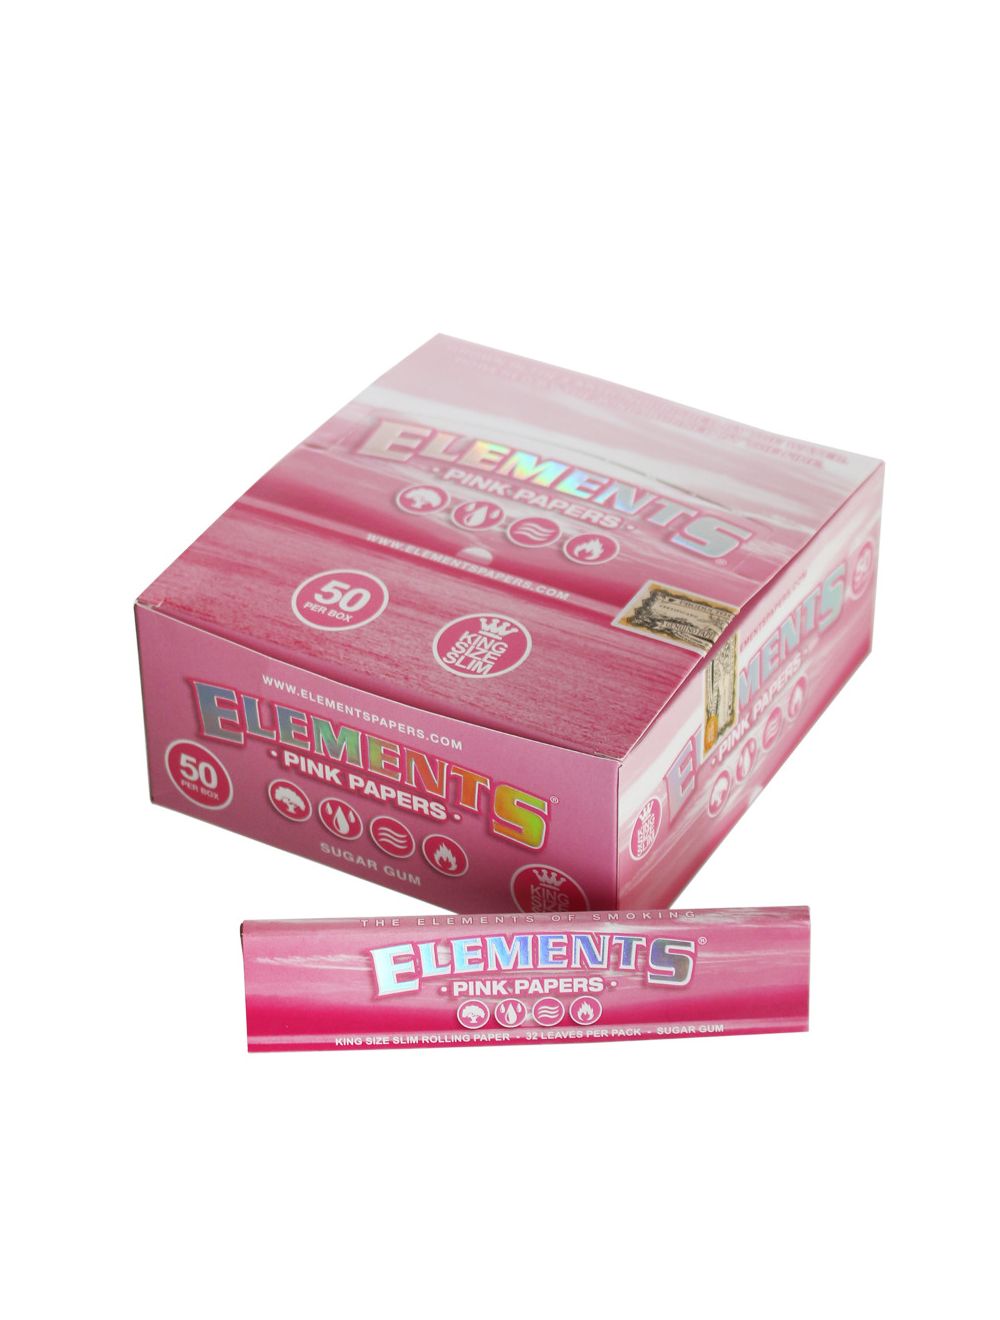 Buy Elements Pink King Size Slim Rolling Papers Online